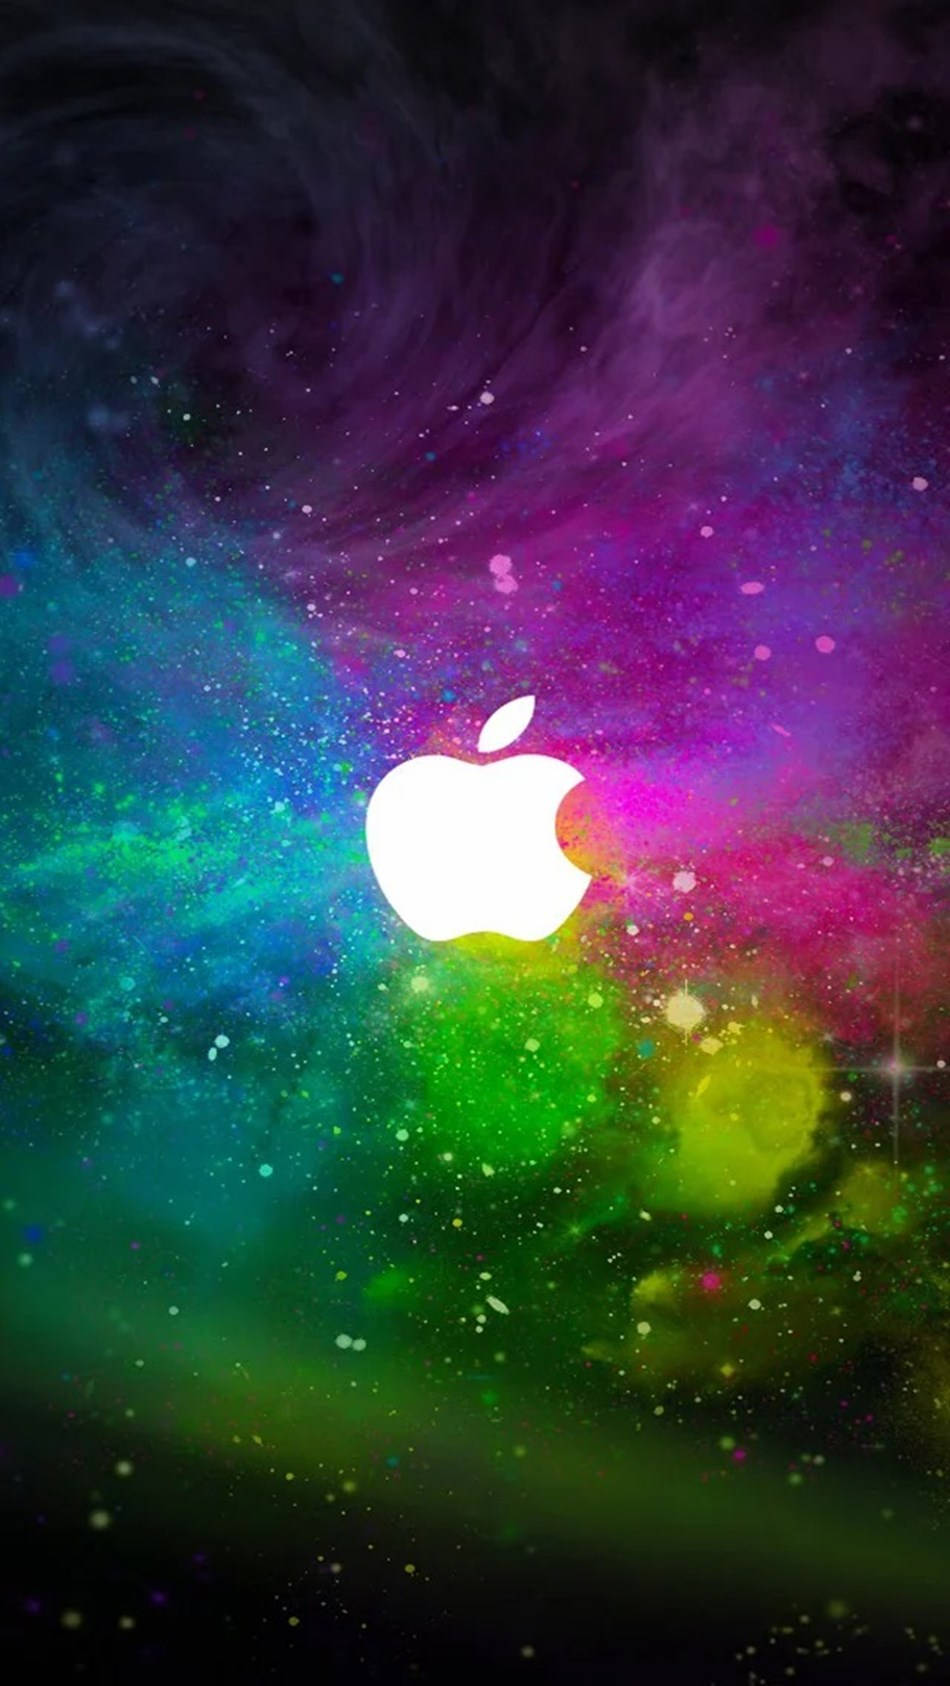 Colors Of The Latest Ipod Touch Wallpaper